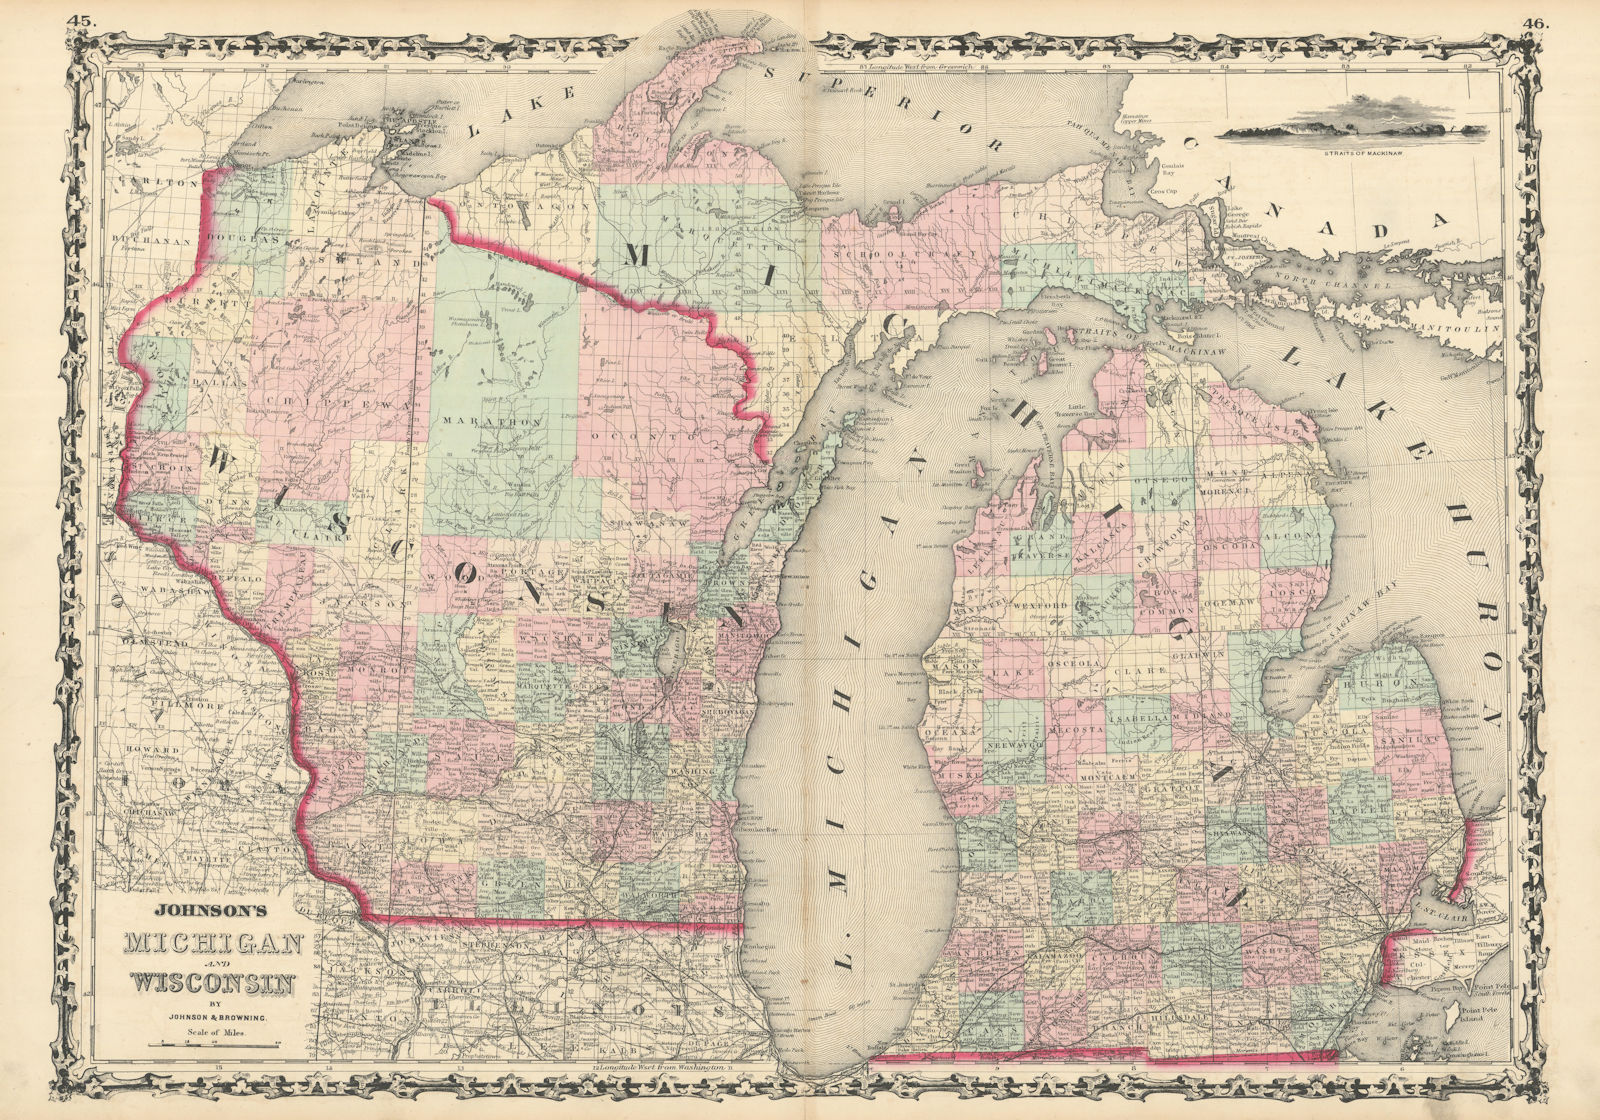 Johnson's Wisconsin & Michigan. State map showing counties. Great Lakes 1861